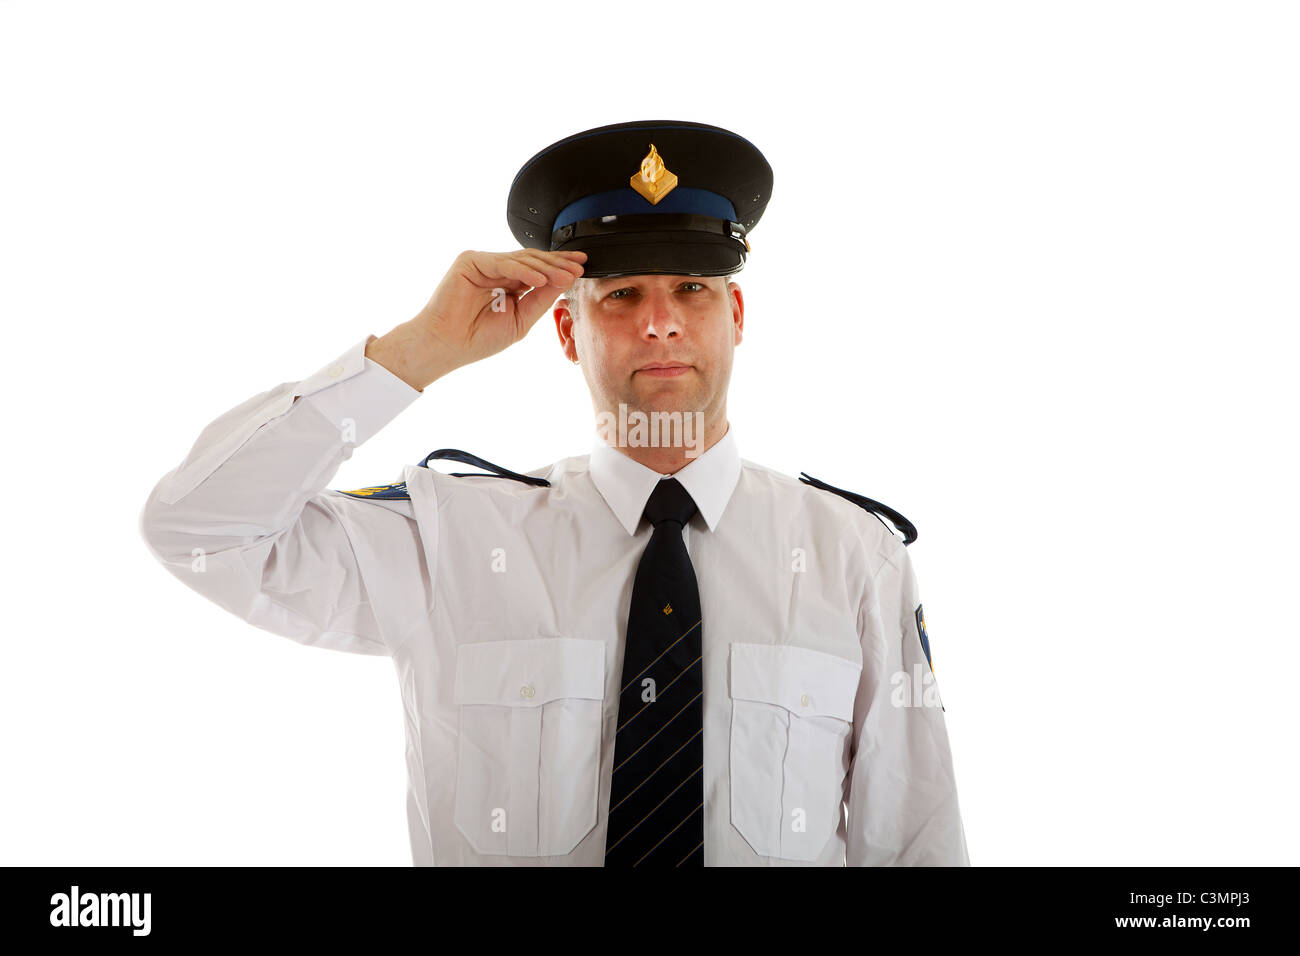 Police officer with hand on cap over white background Stock Photo